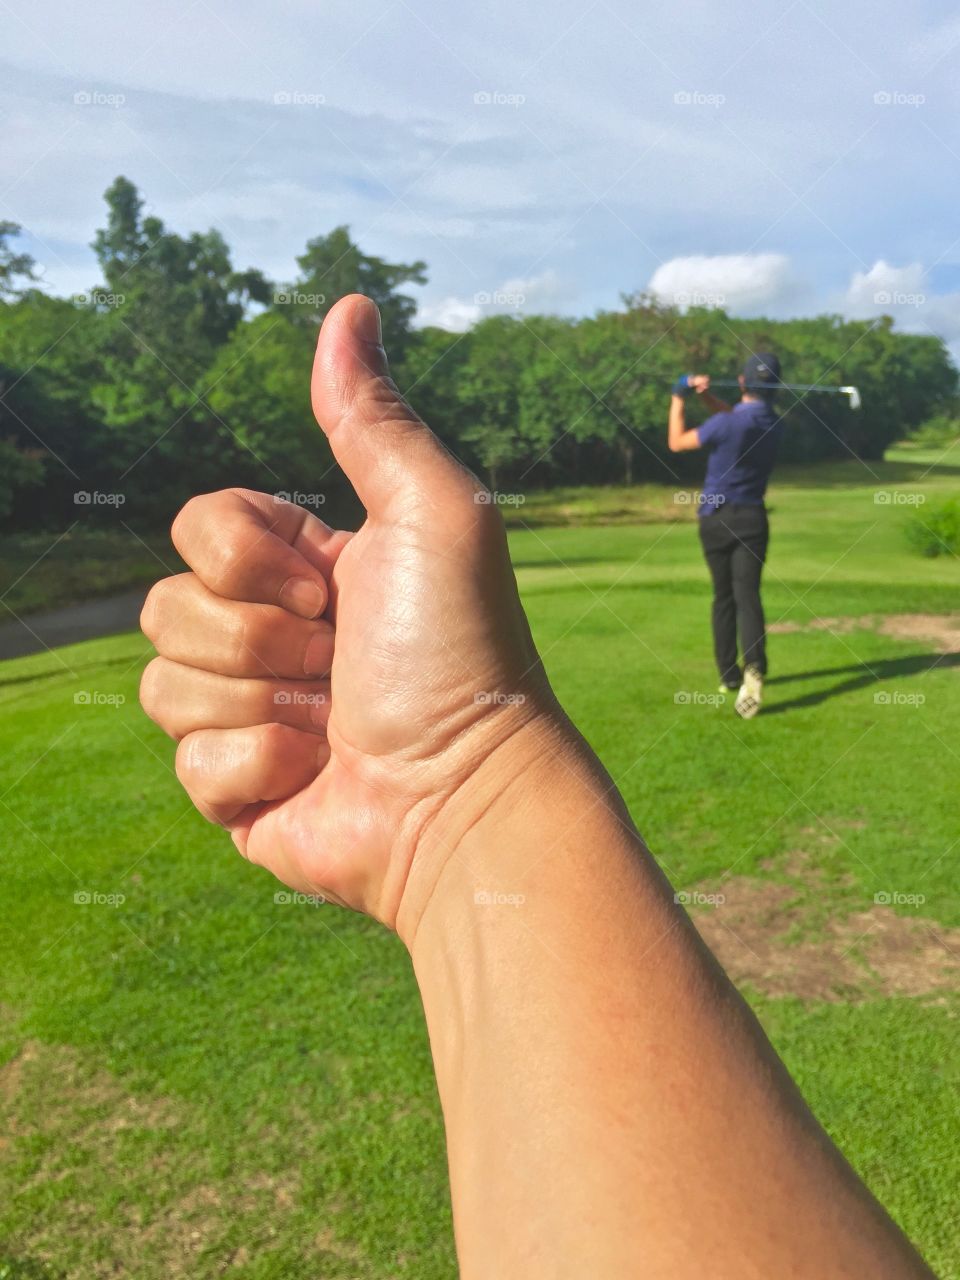 Thumb up for good start of the day at the golf course.